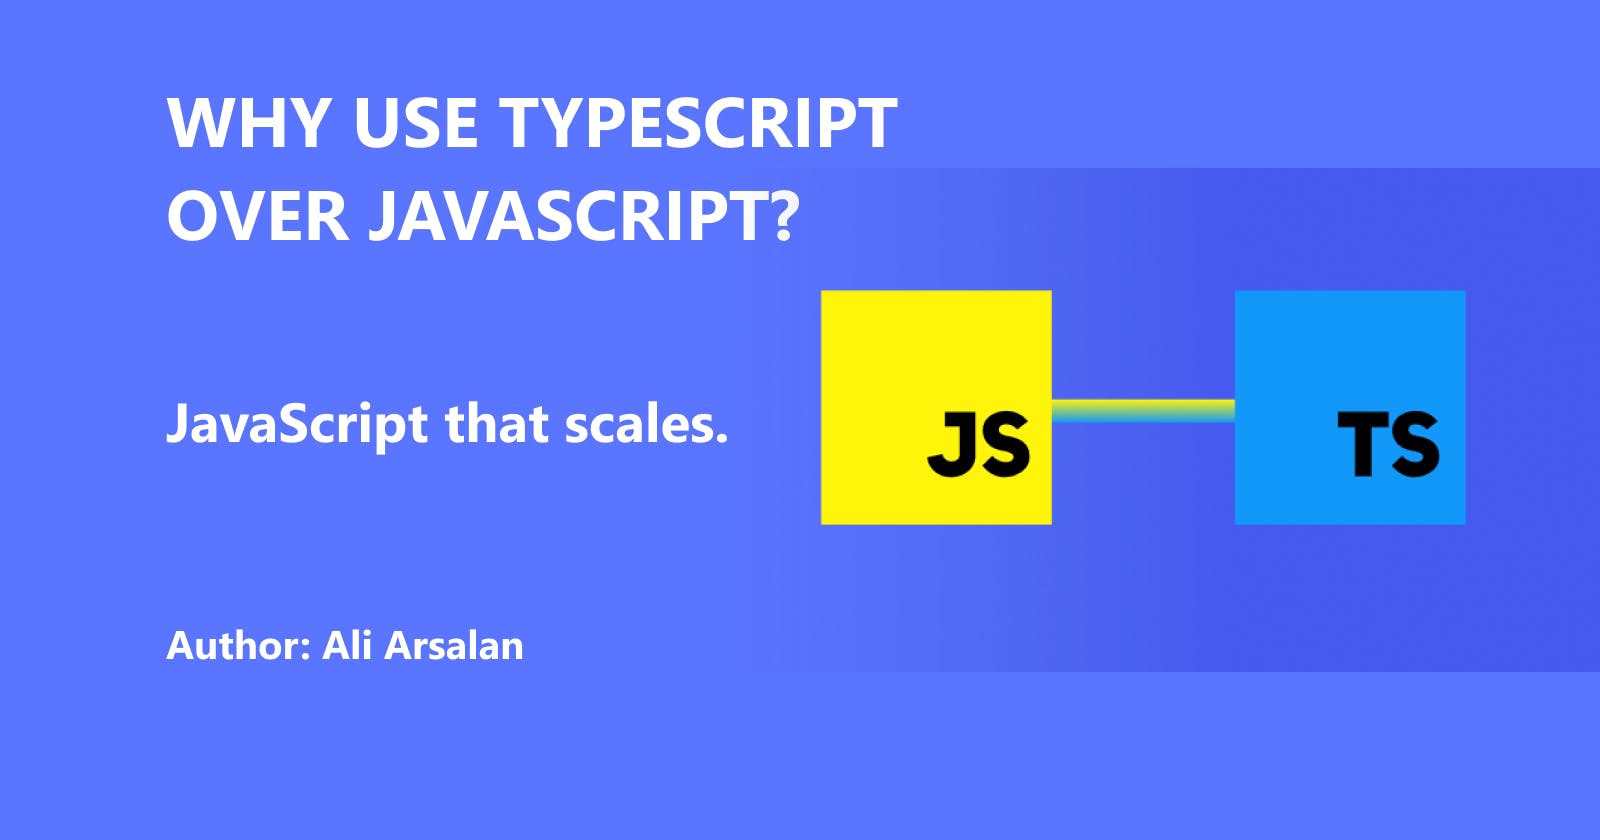 Why use Typescript over Javascript?